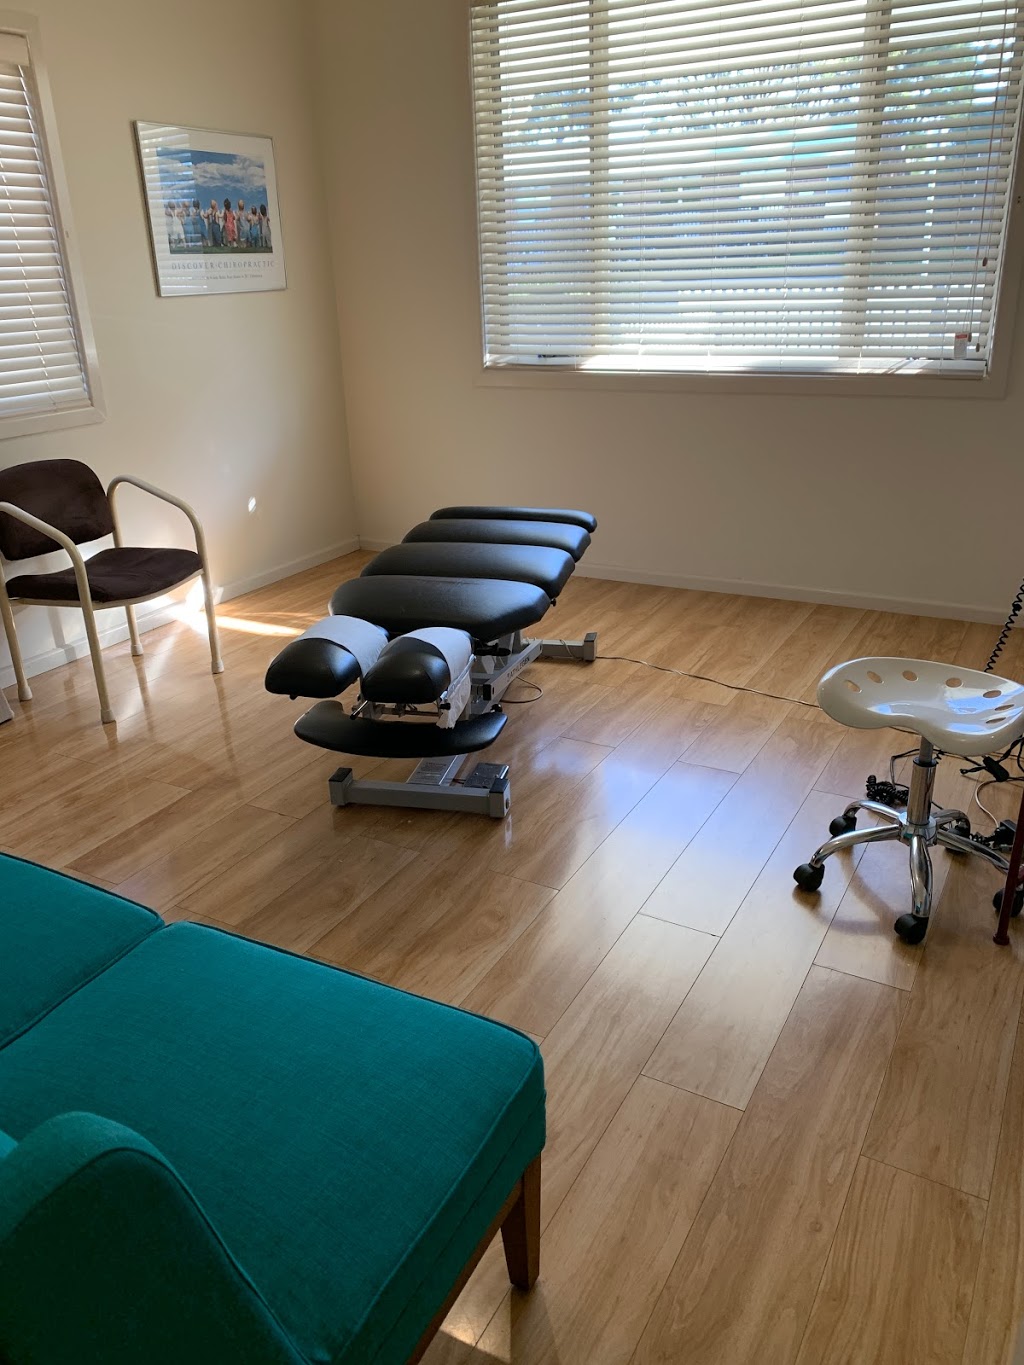 Taylor Chiropractic Shellharbour | health | 51 Addison St, Shellharbour NSW 2529, Australia | 0242956589 OR +61 2 4295 6589